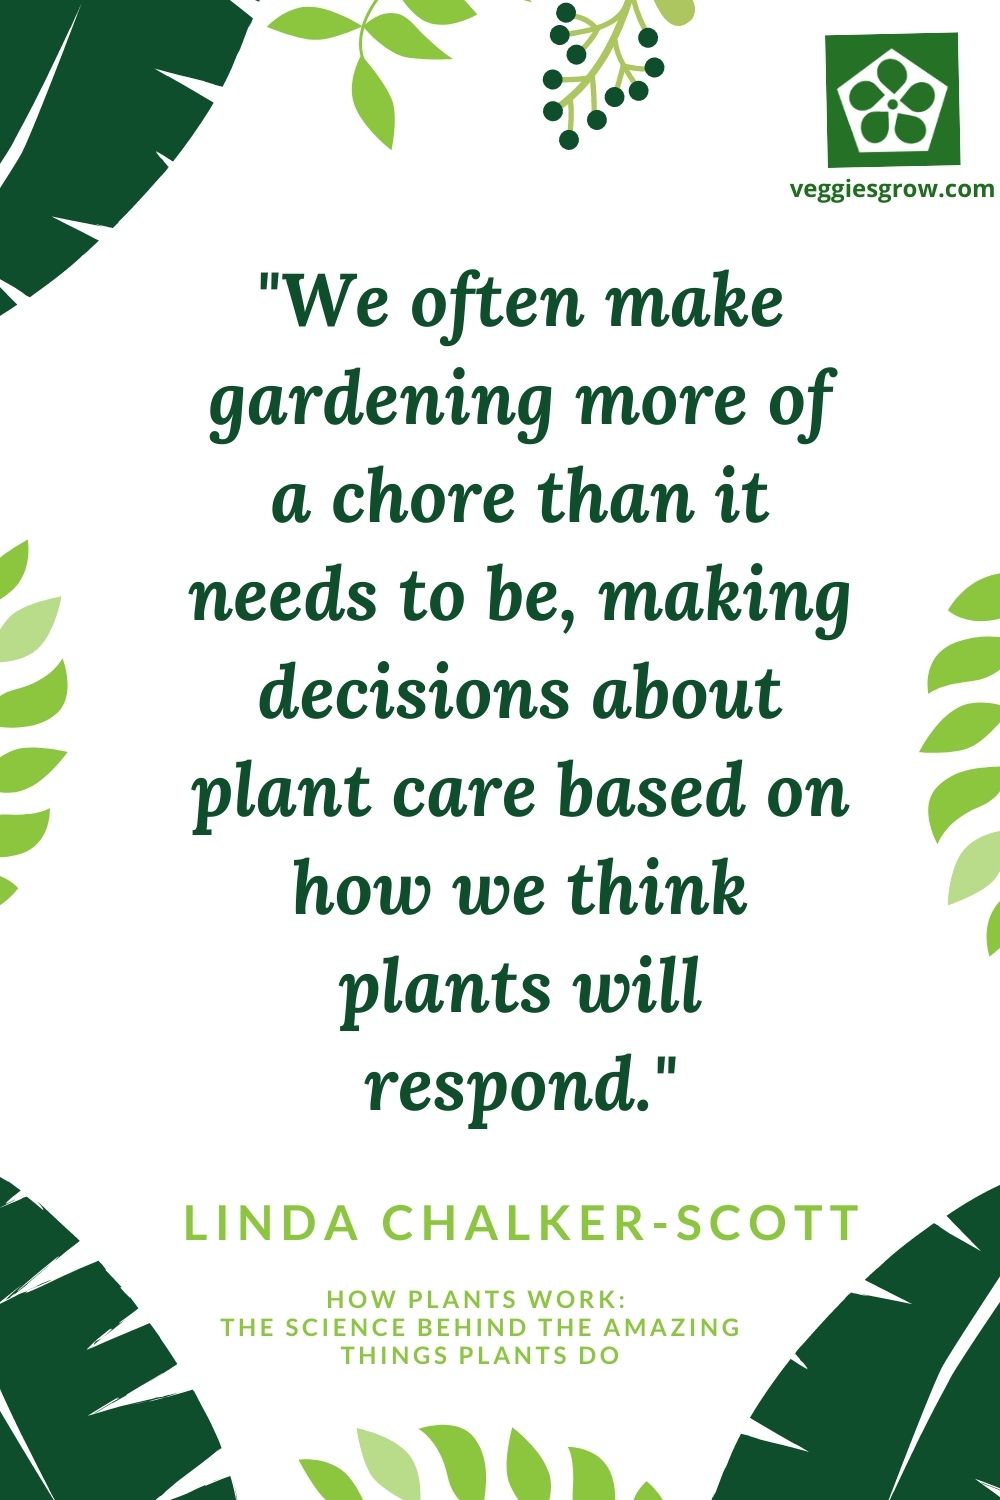 "We often make gardening more of a chore than it needs to be, making decisions about plant care based on how we think plants will respond." - Linda Chalker-Scott